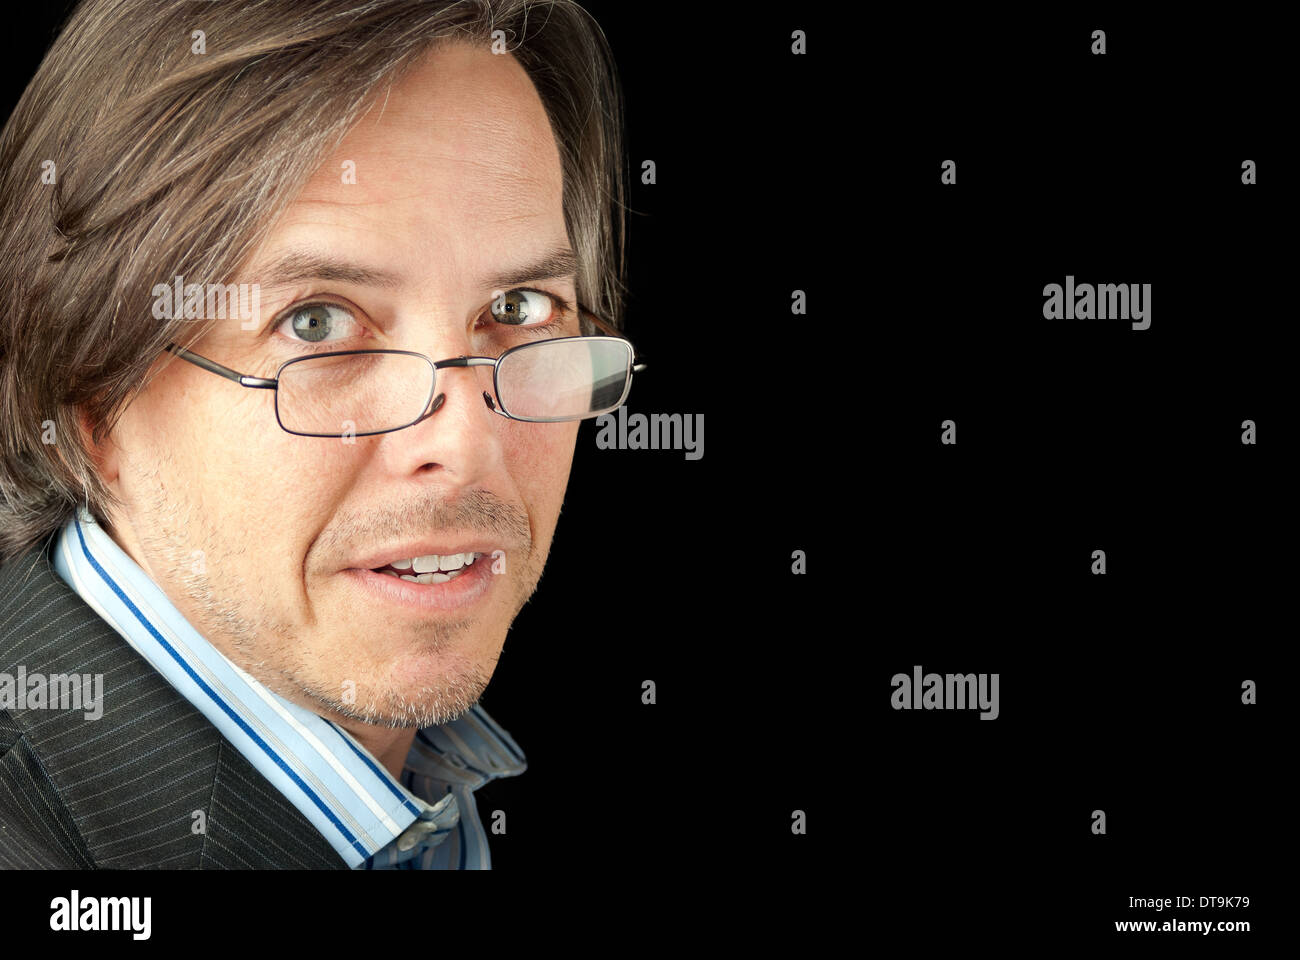 Close-up of a anxious businessman wearing glasses looking to camera. Stock Photo